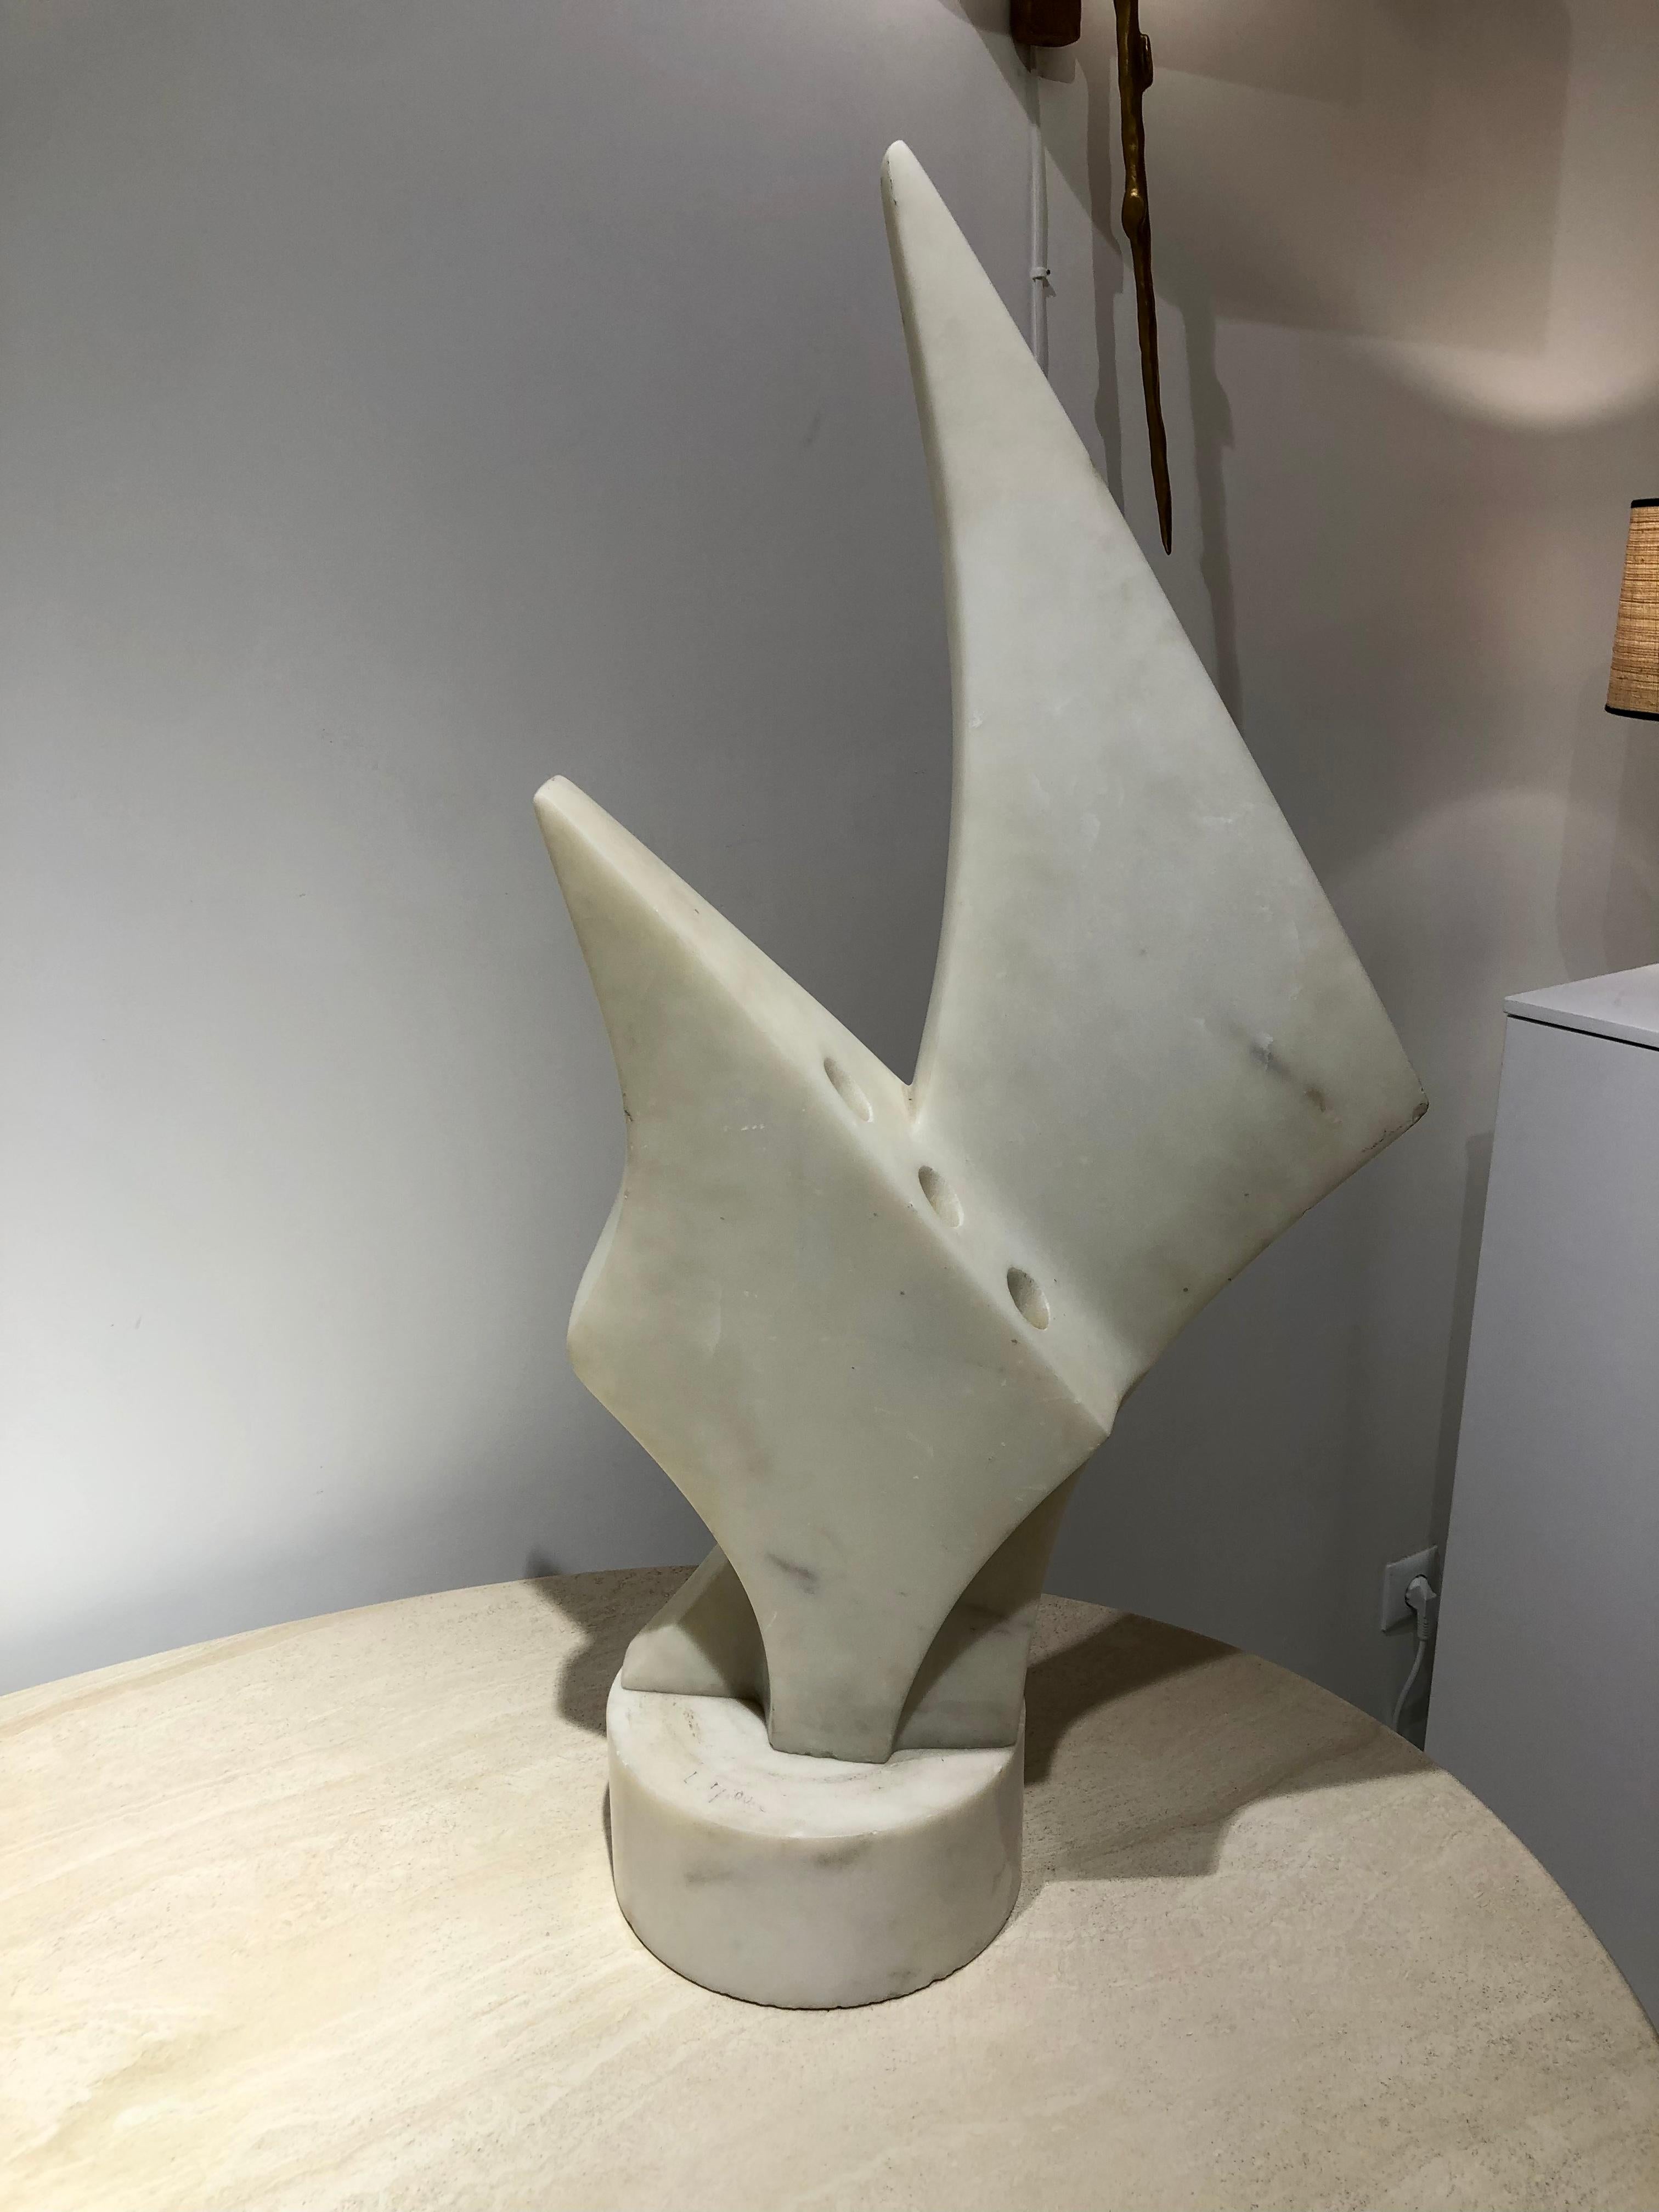 Sculpture by Luiza Miller
Carrara marble from 1970.